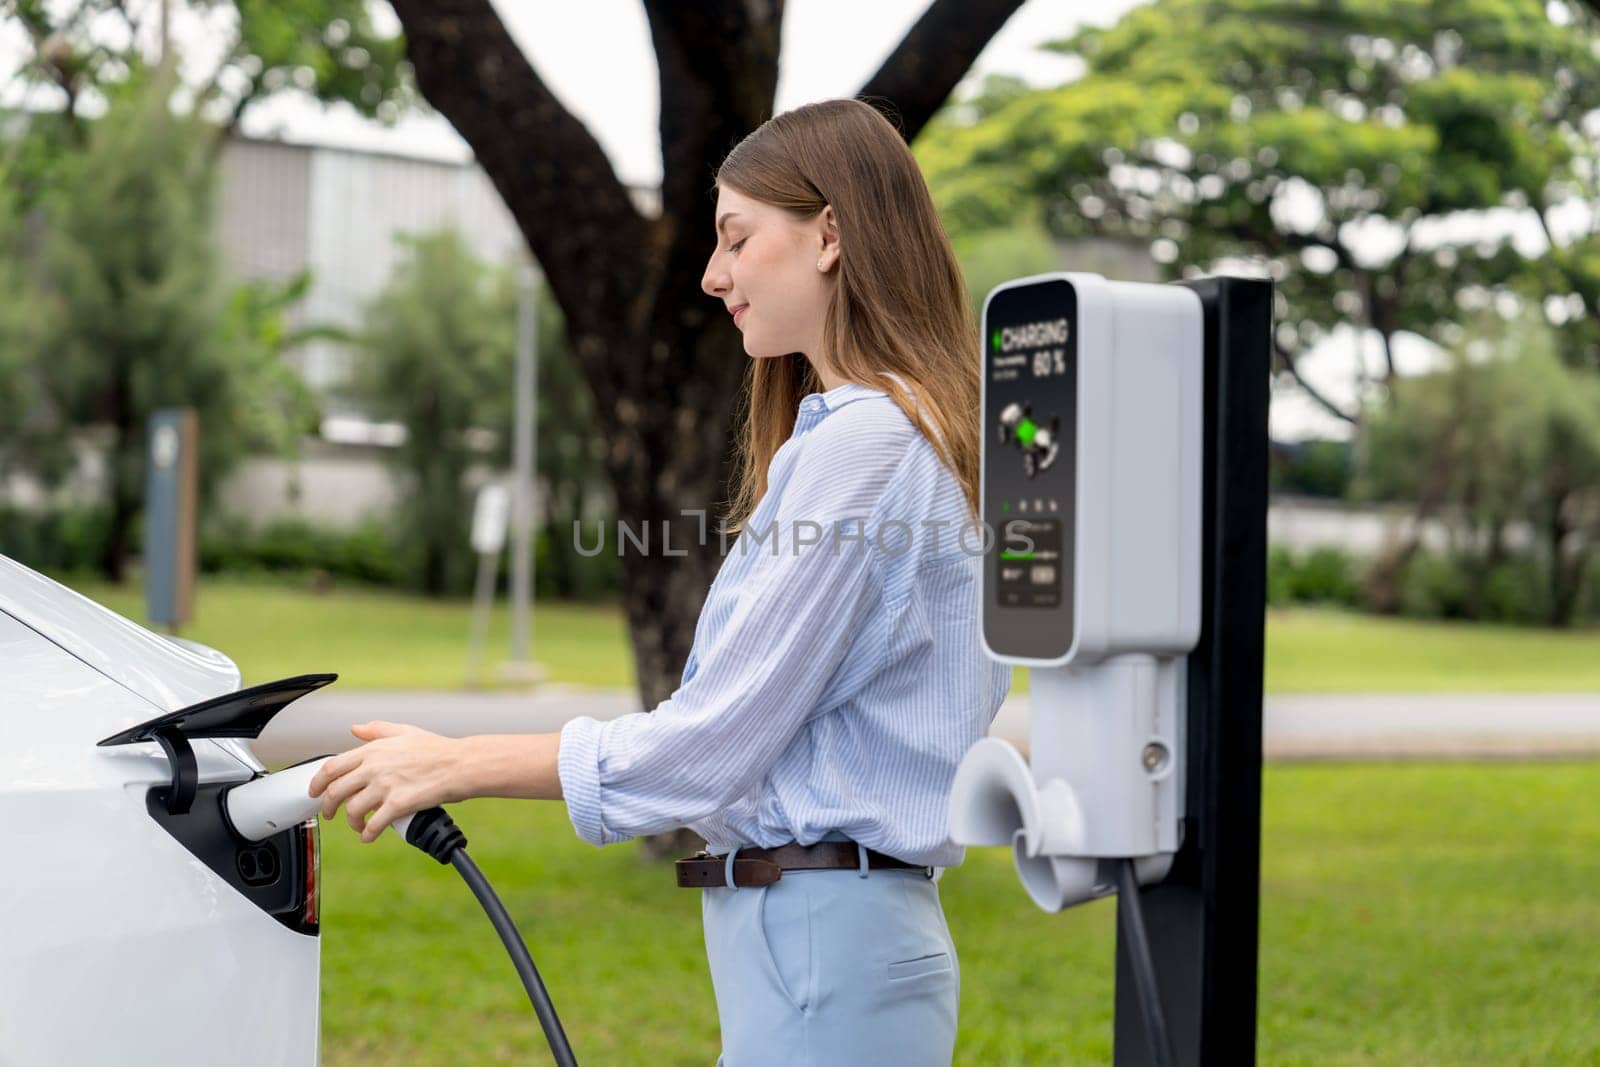 Young woman recharge EV electric vehicle's battery from EV charging station in outdoor green city park scenic. Eco friendly urban transport and commute with eco friendly EV car travel. Exalt